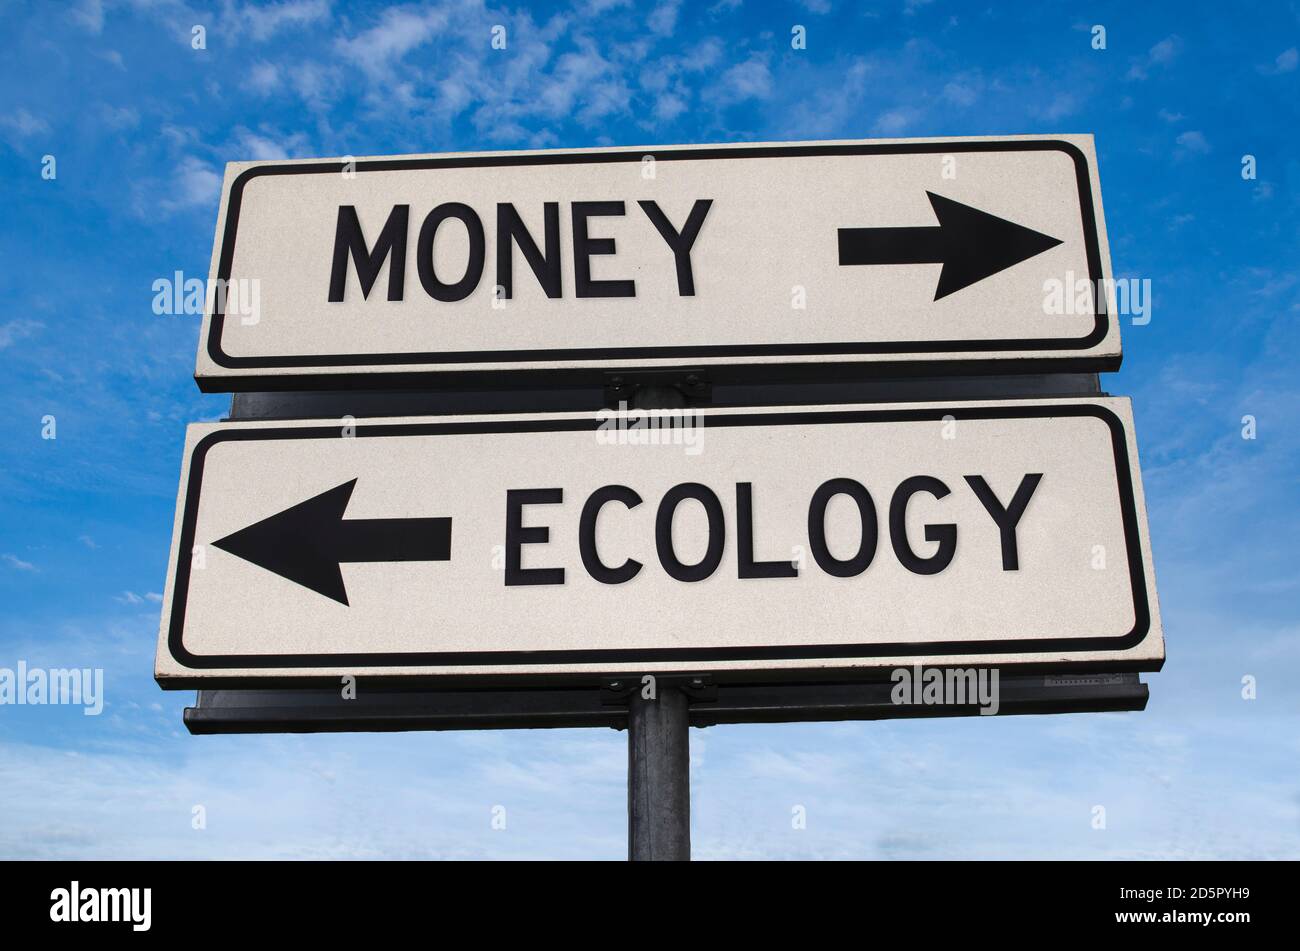 Money vs ecology. White two street signs with arrow on metal pole with word. Directional road. Crossroads Road Sign, Two Arrow. Blue sky background. Stock Photo